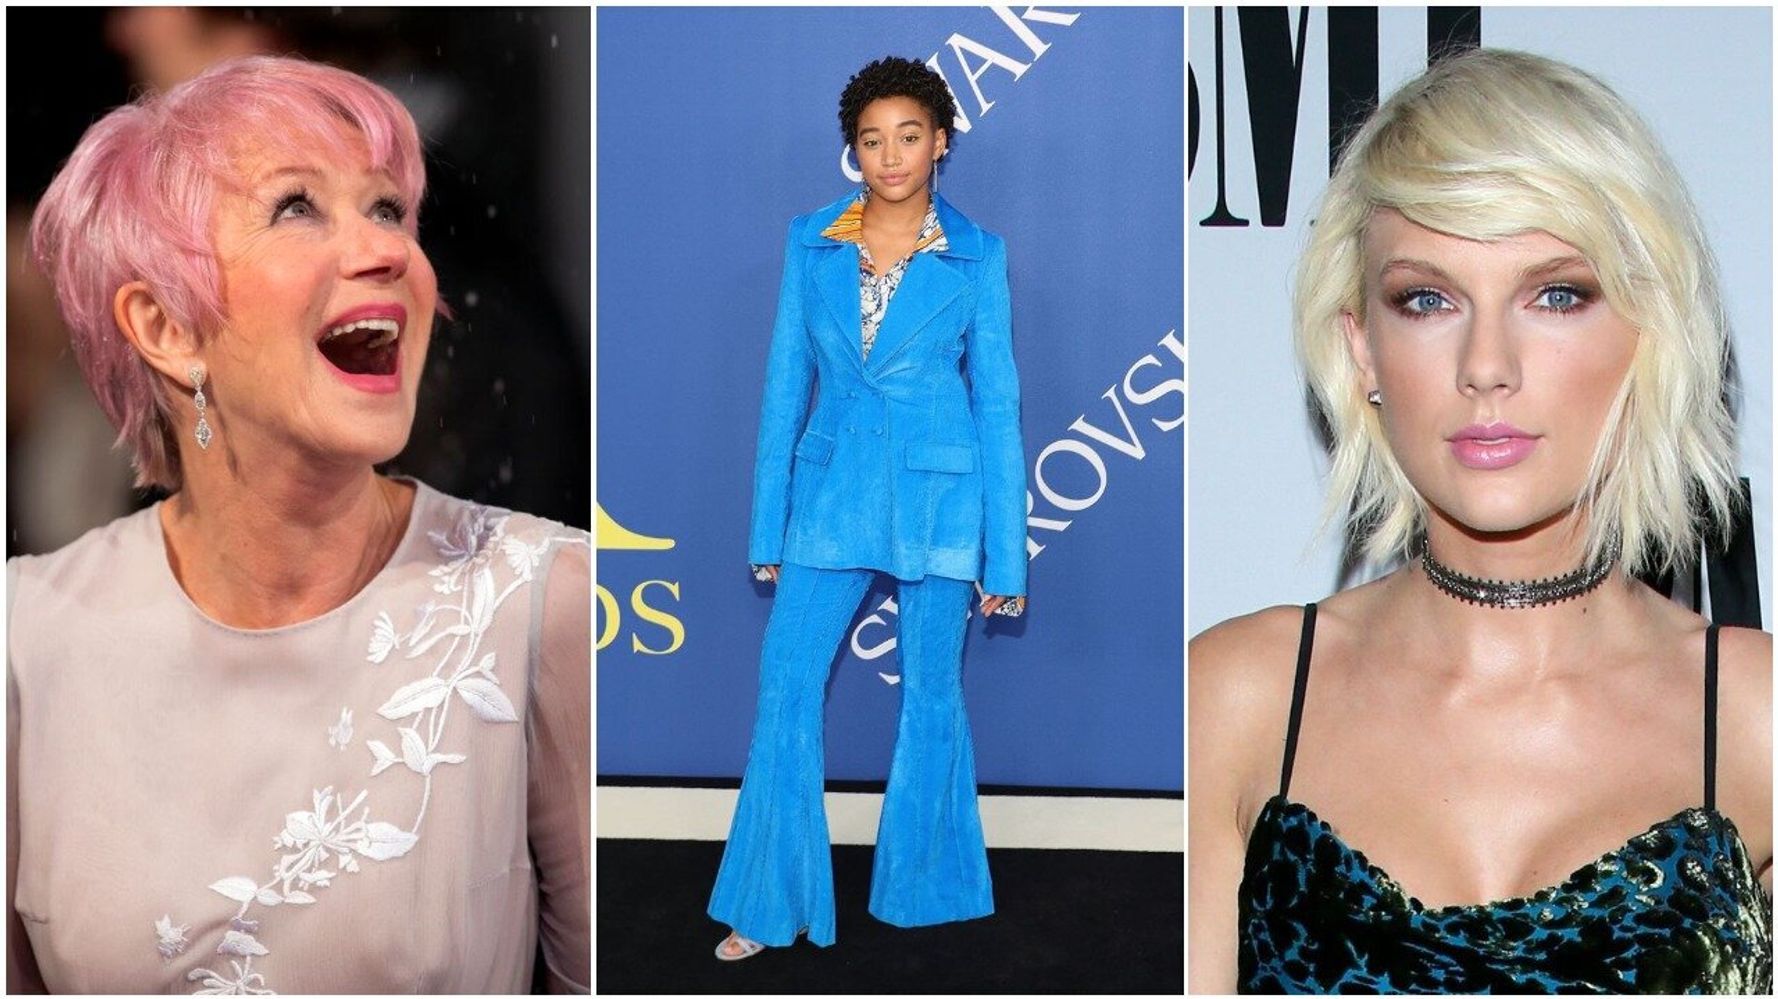 The 10 most defining fashion moments of the decade